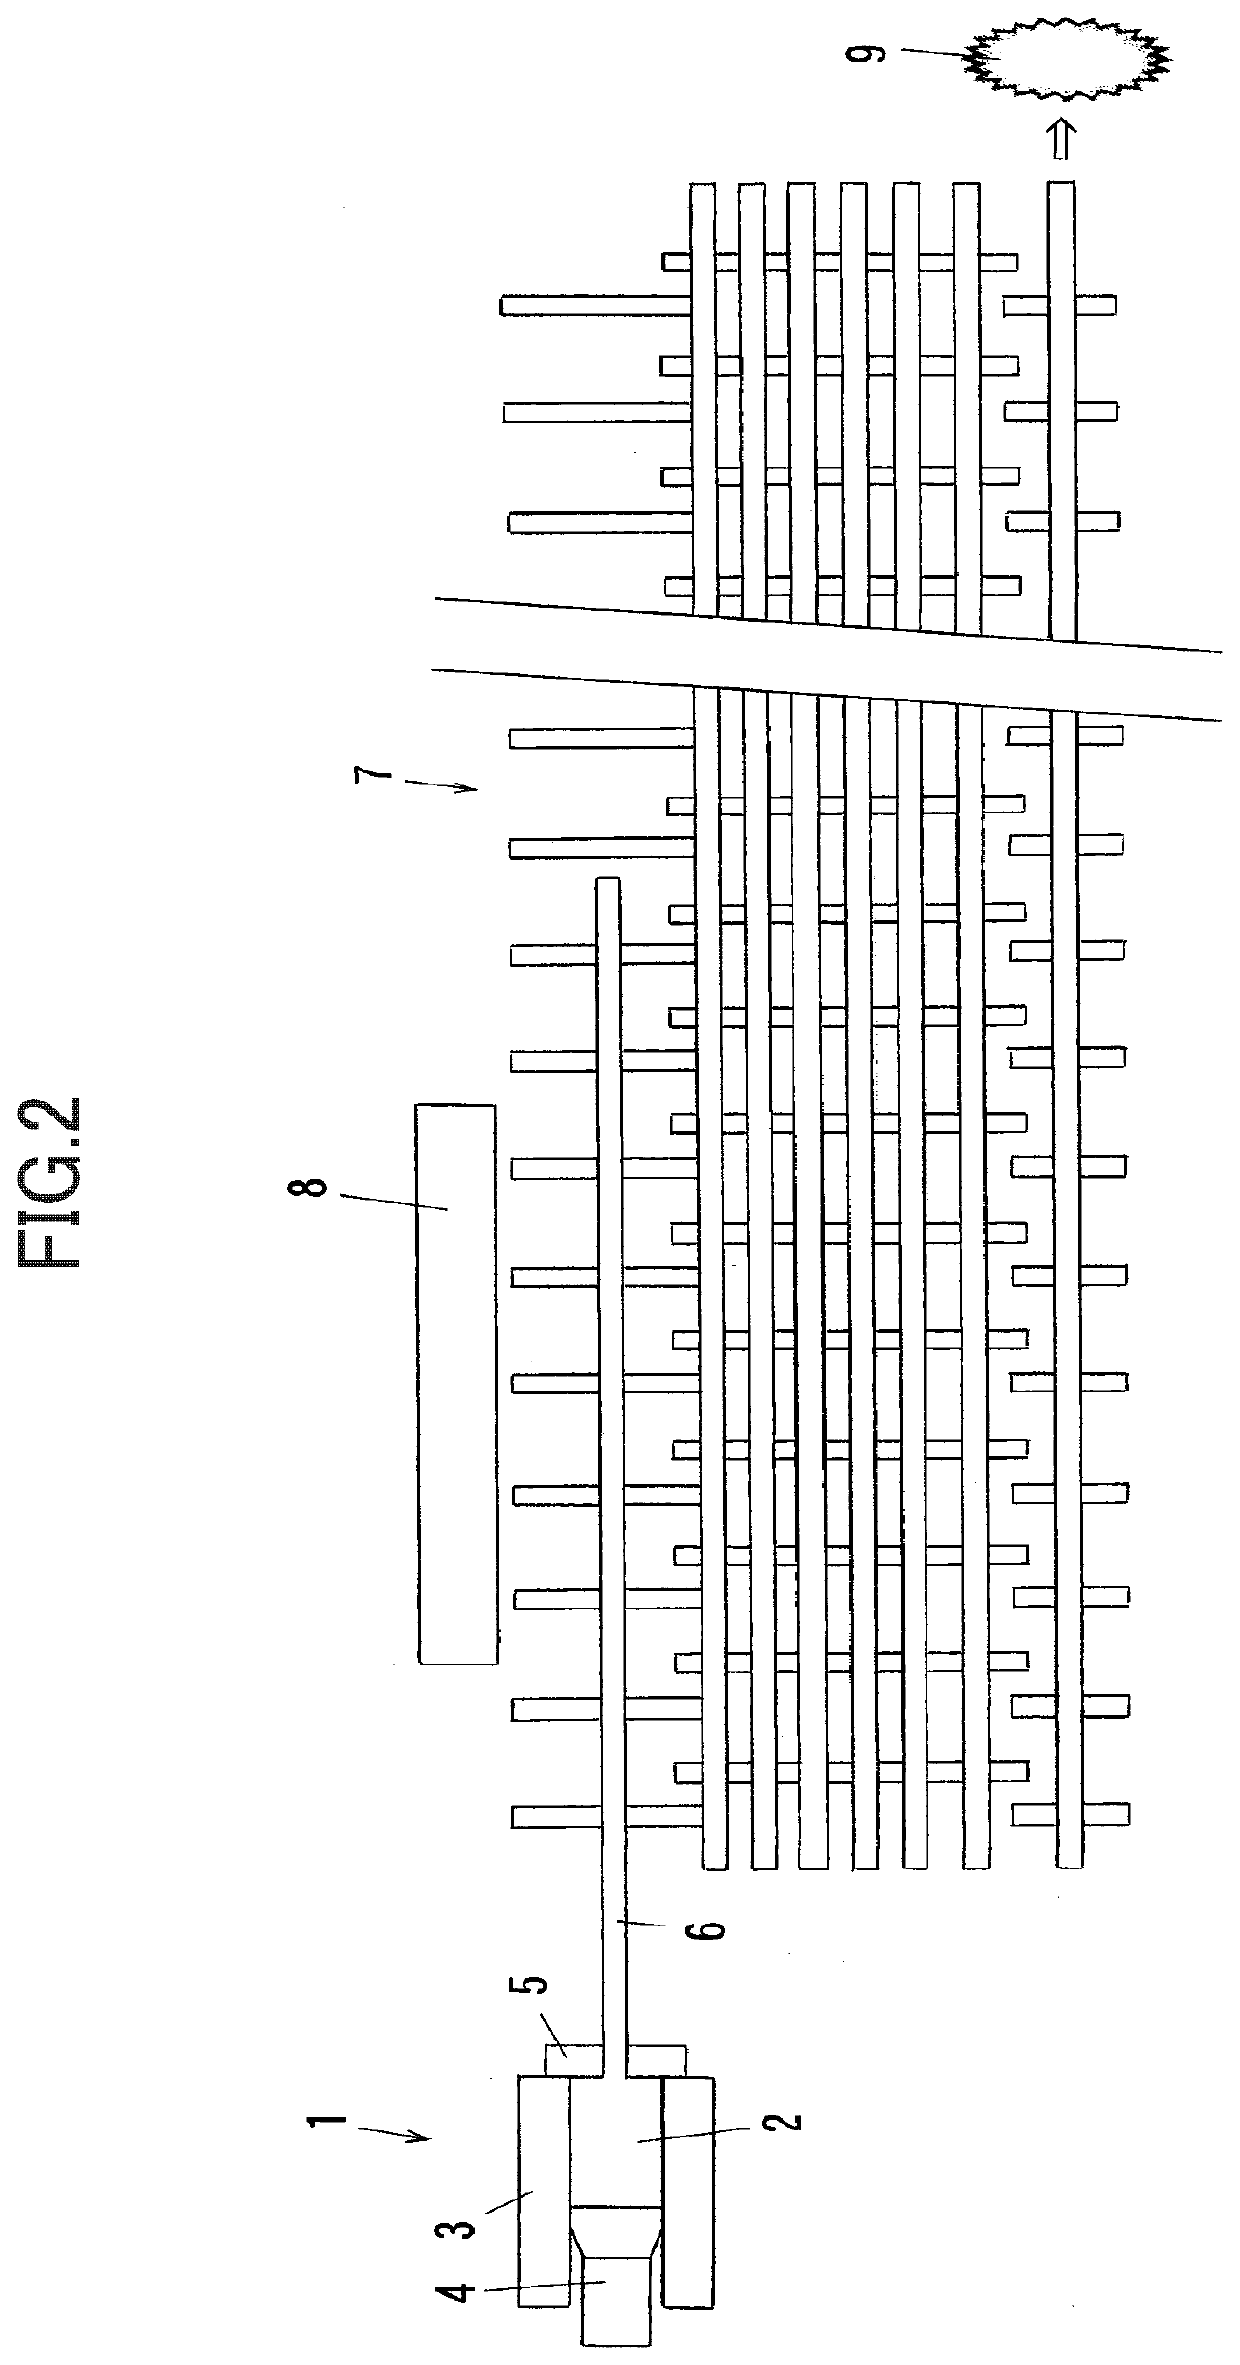 Method and system for producing aluminum alloy parts